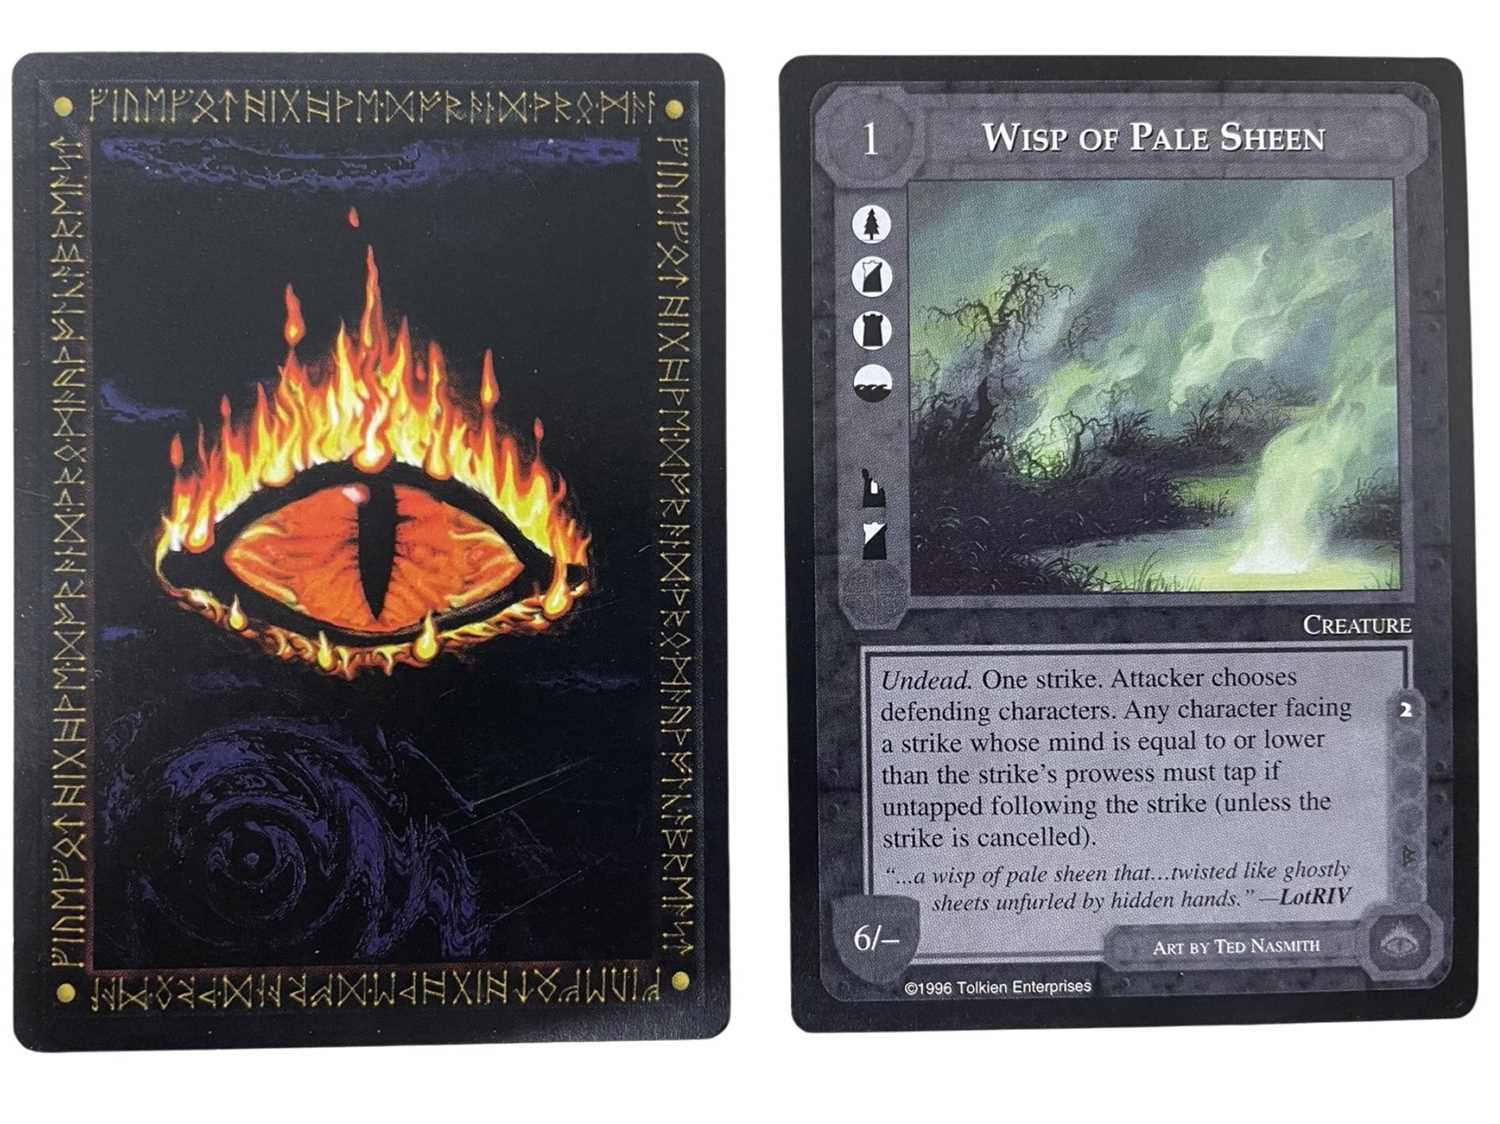 30x 1996 Middle Earth: Dark Minions trading cards, limited edition booster pack editions. - Image 2 of 2